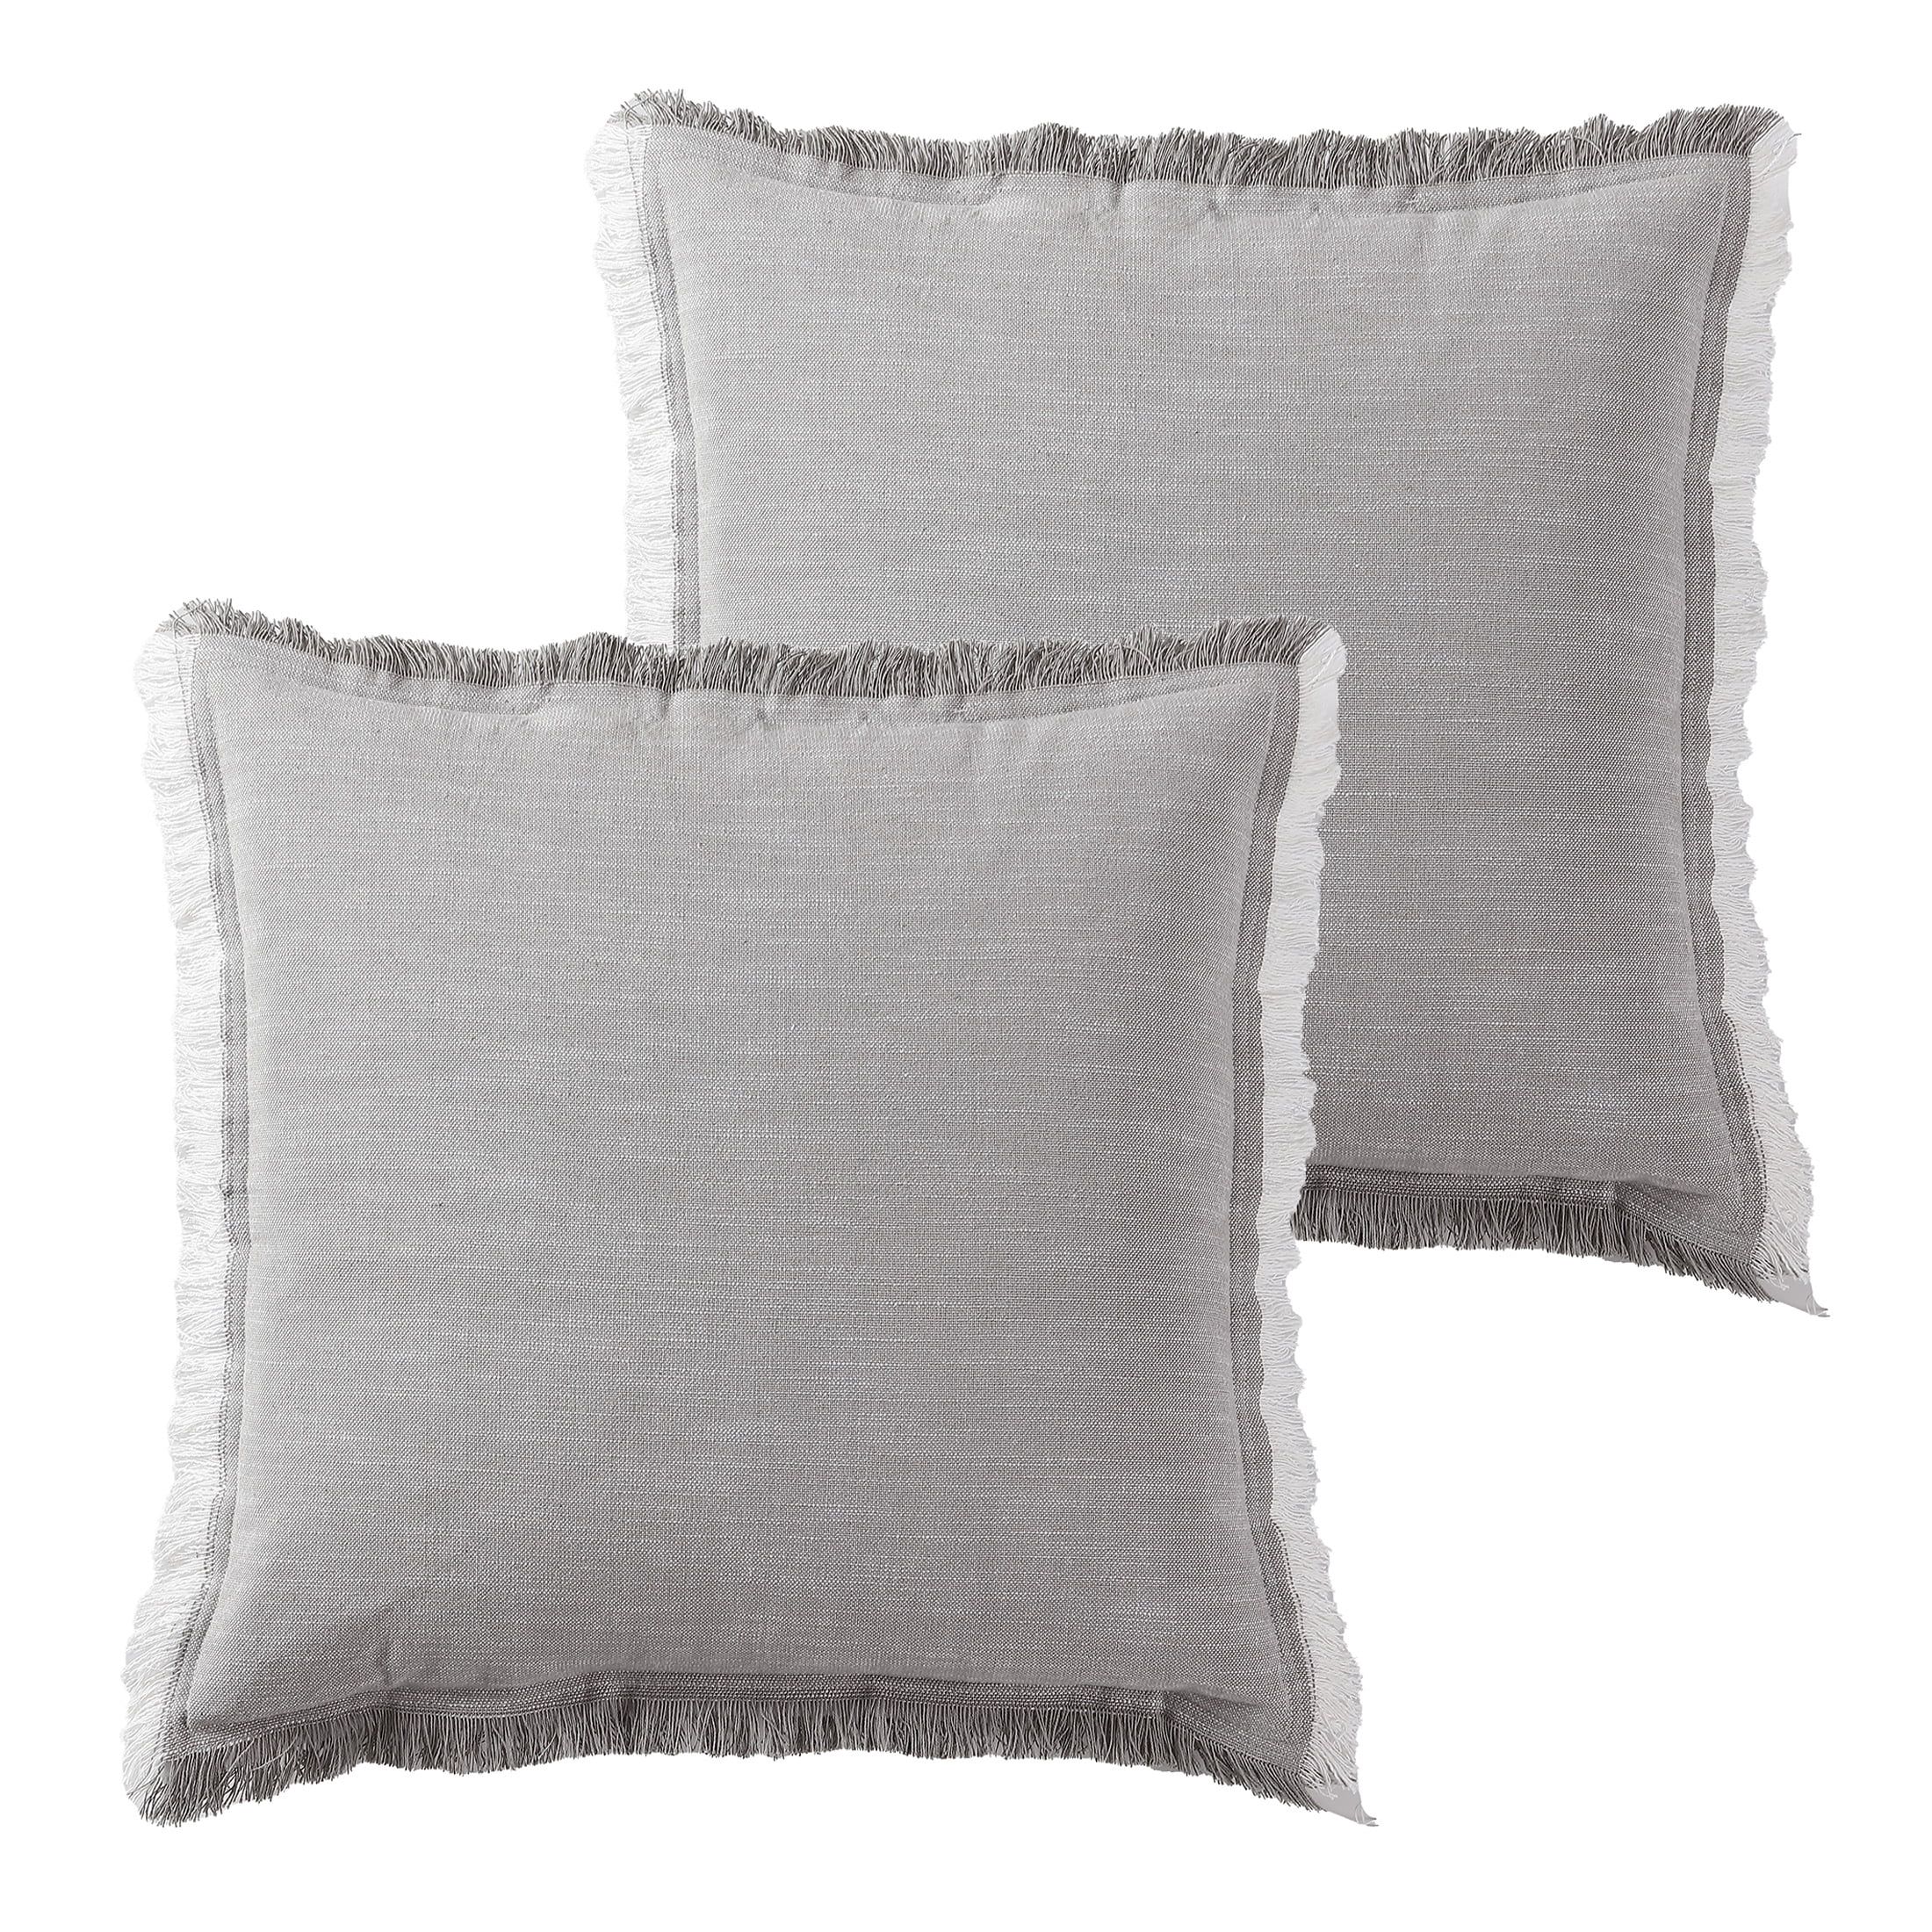 Better Homes & Gardens Decorative Throw Pillow, Cotton Fringe, Square, Grey, 20''x20'', 2 Pack | Walmart (US)